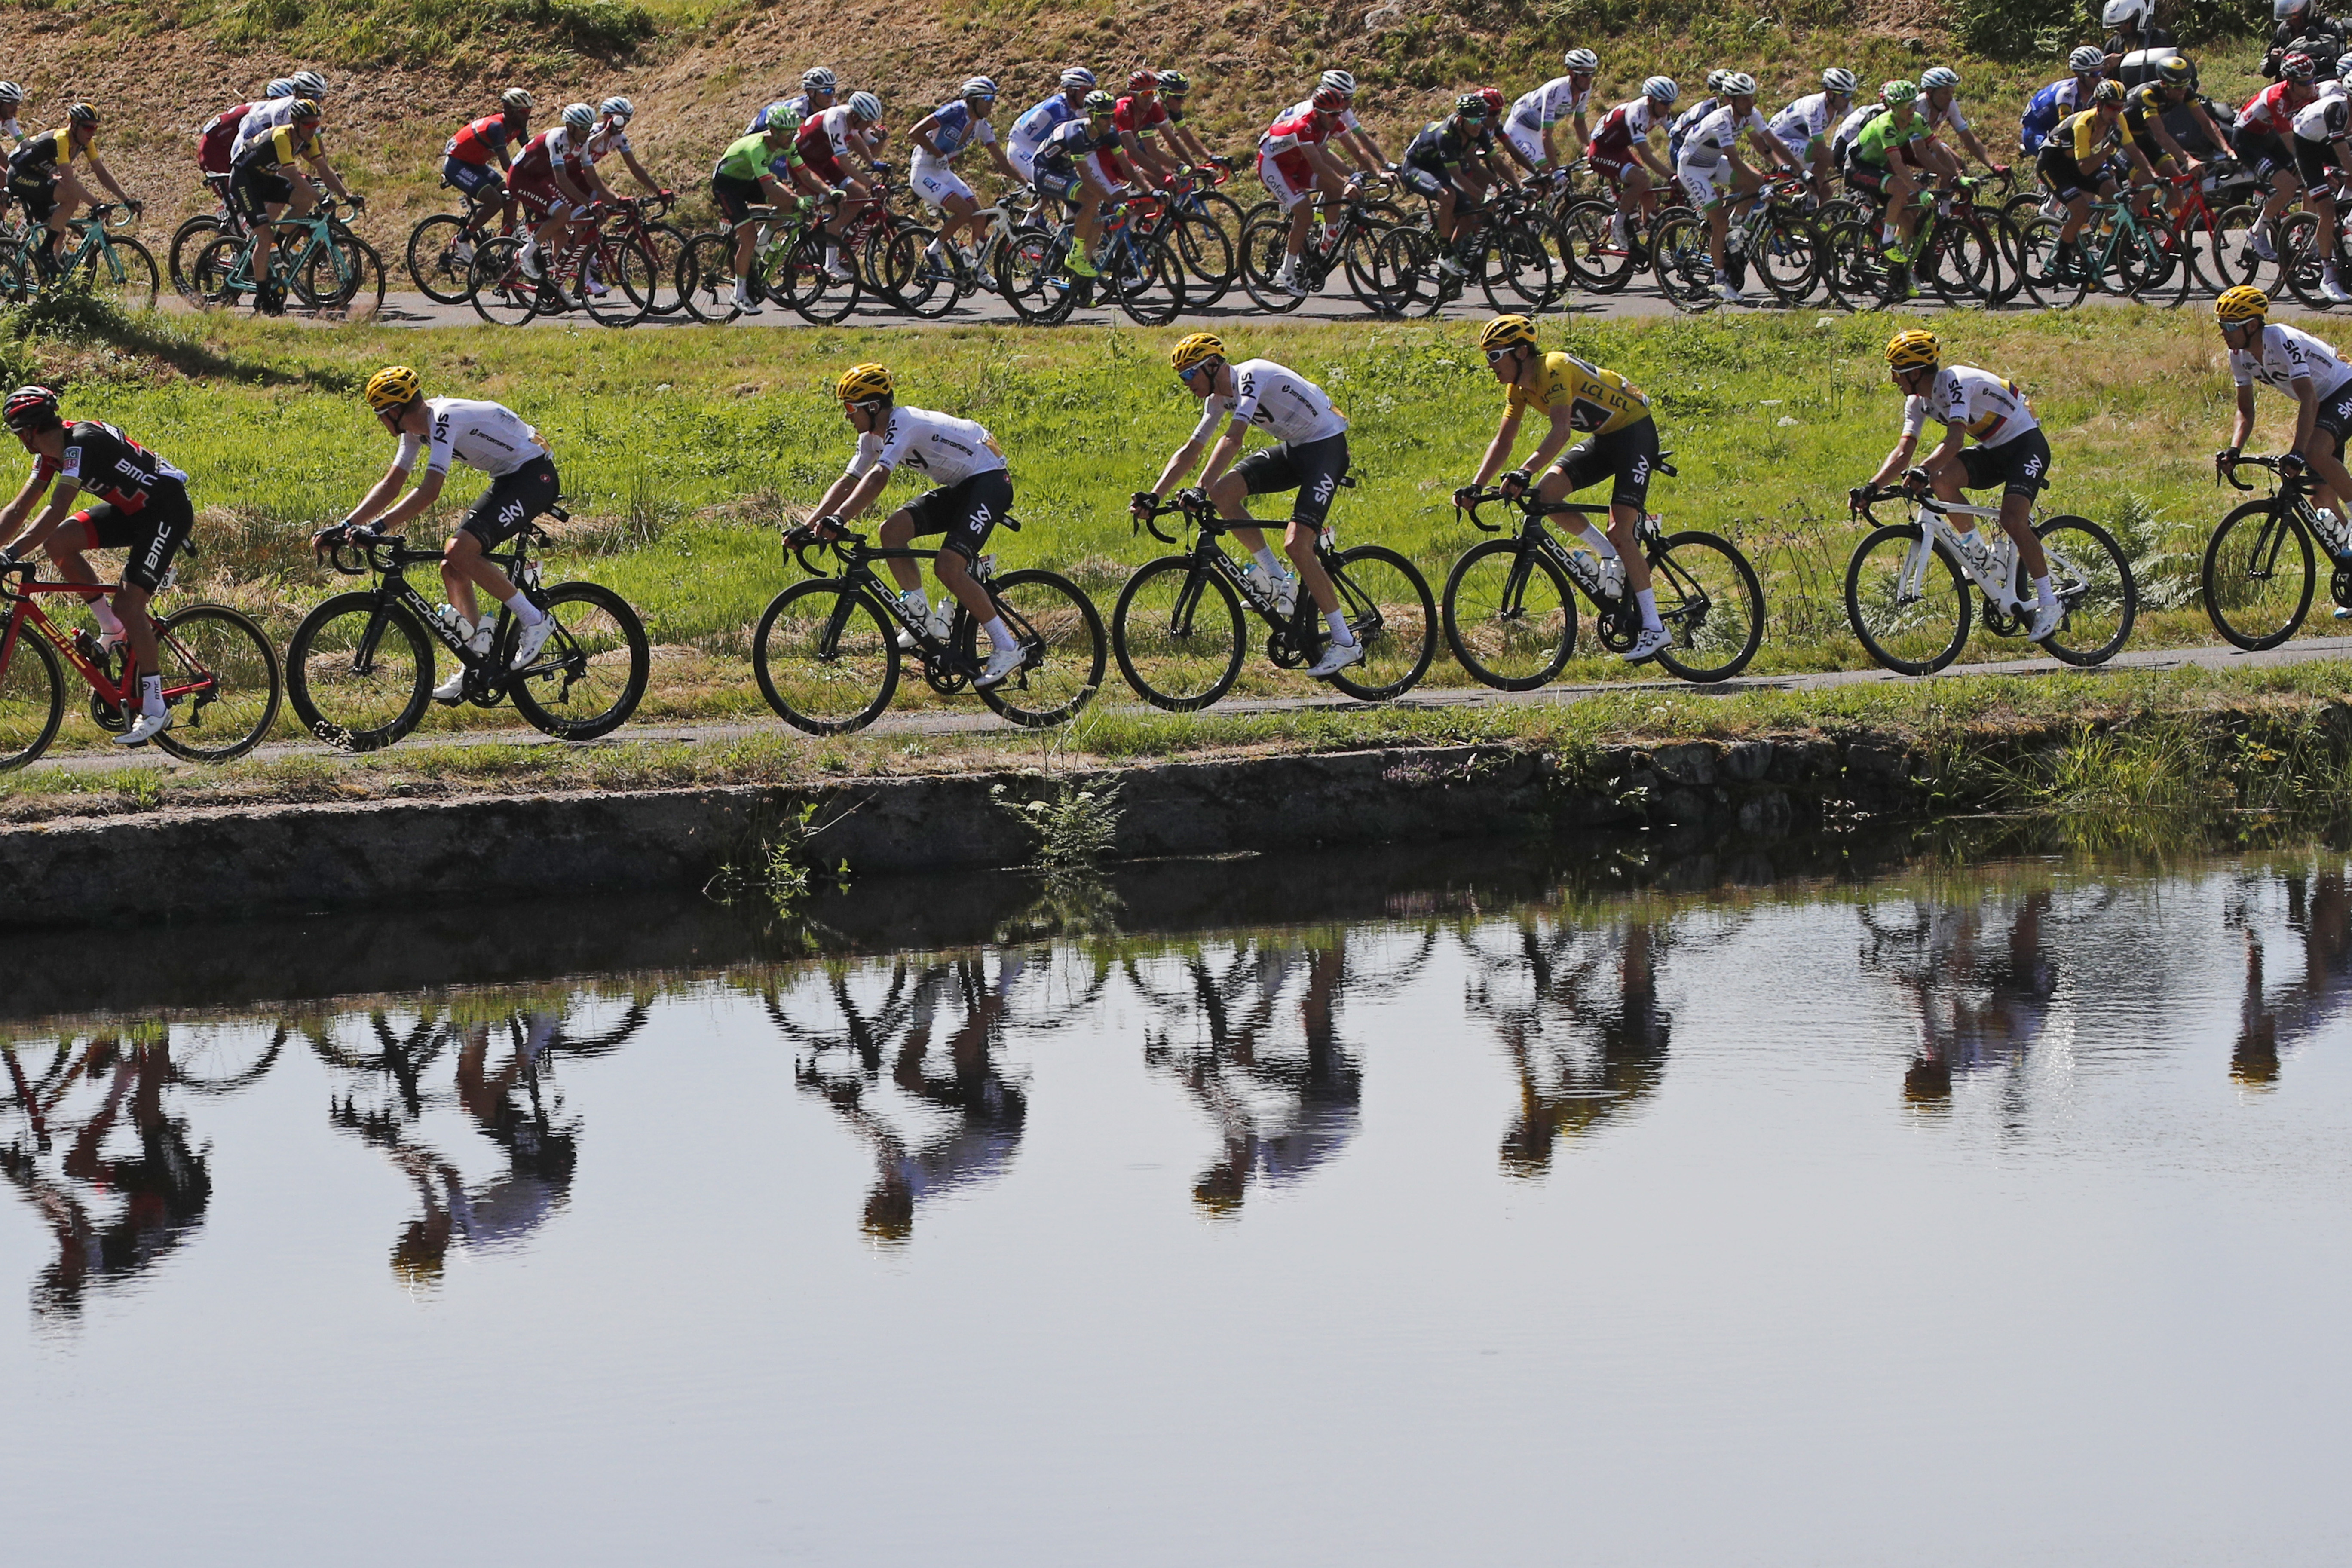 The pack with Britain's Geraint Thomas, wearing the overall leader's yellow jersey, is reflected in a pond during the fifth stage of the Tour de France cycling race over 160.5 kilometers (99.7 miles) with start in Vittel and finish in La Planche des Belles Filles, France, Wednesday, July 5, 2017. (AP Photo/Christophe Ena)